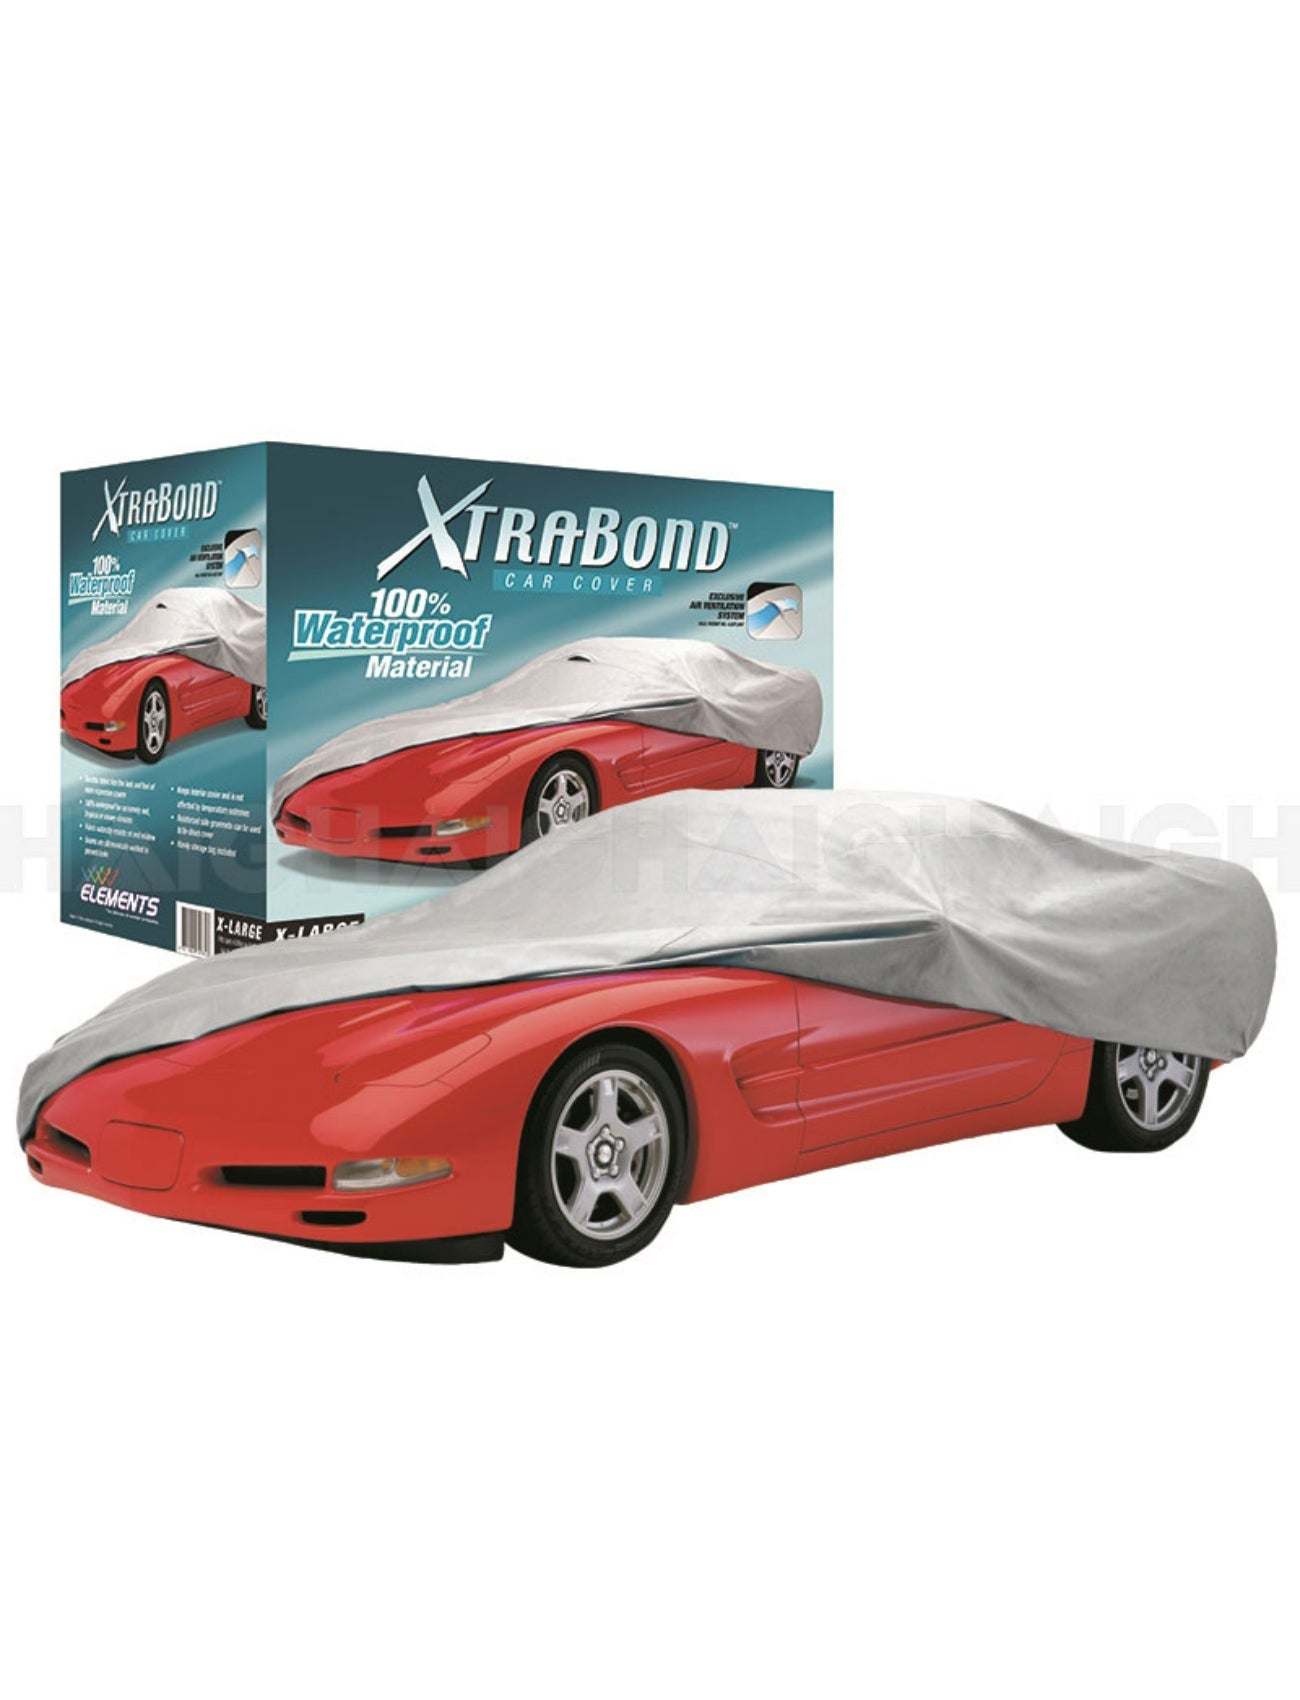 XTRABOND WATERPROOF CAR COVER LARGE